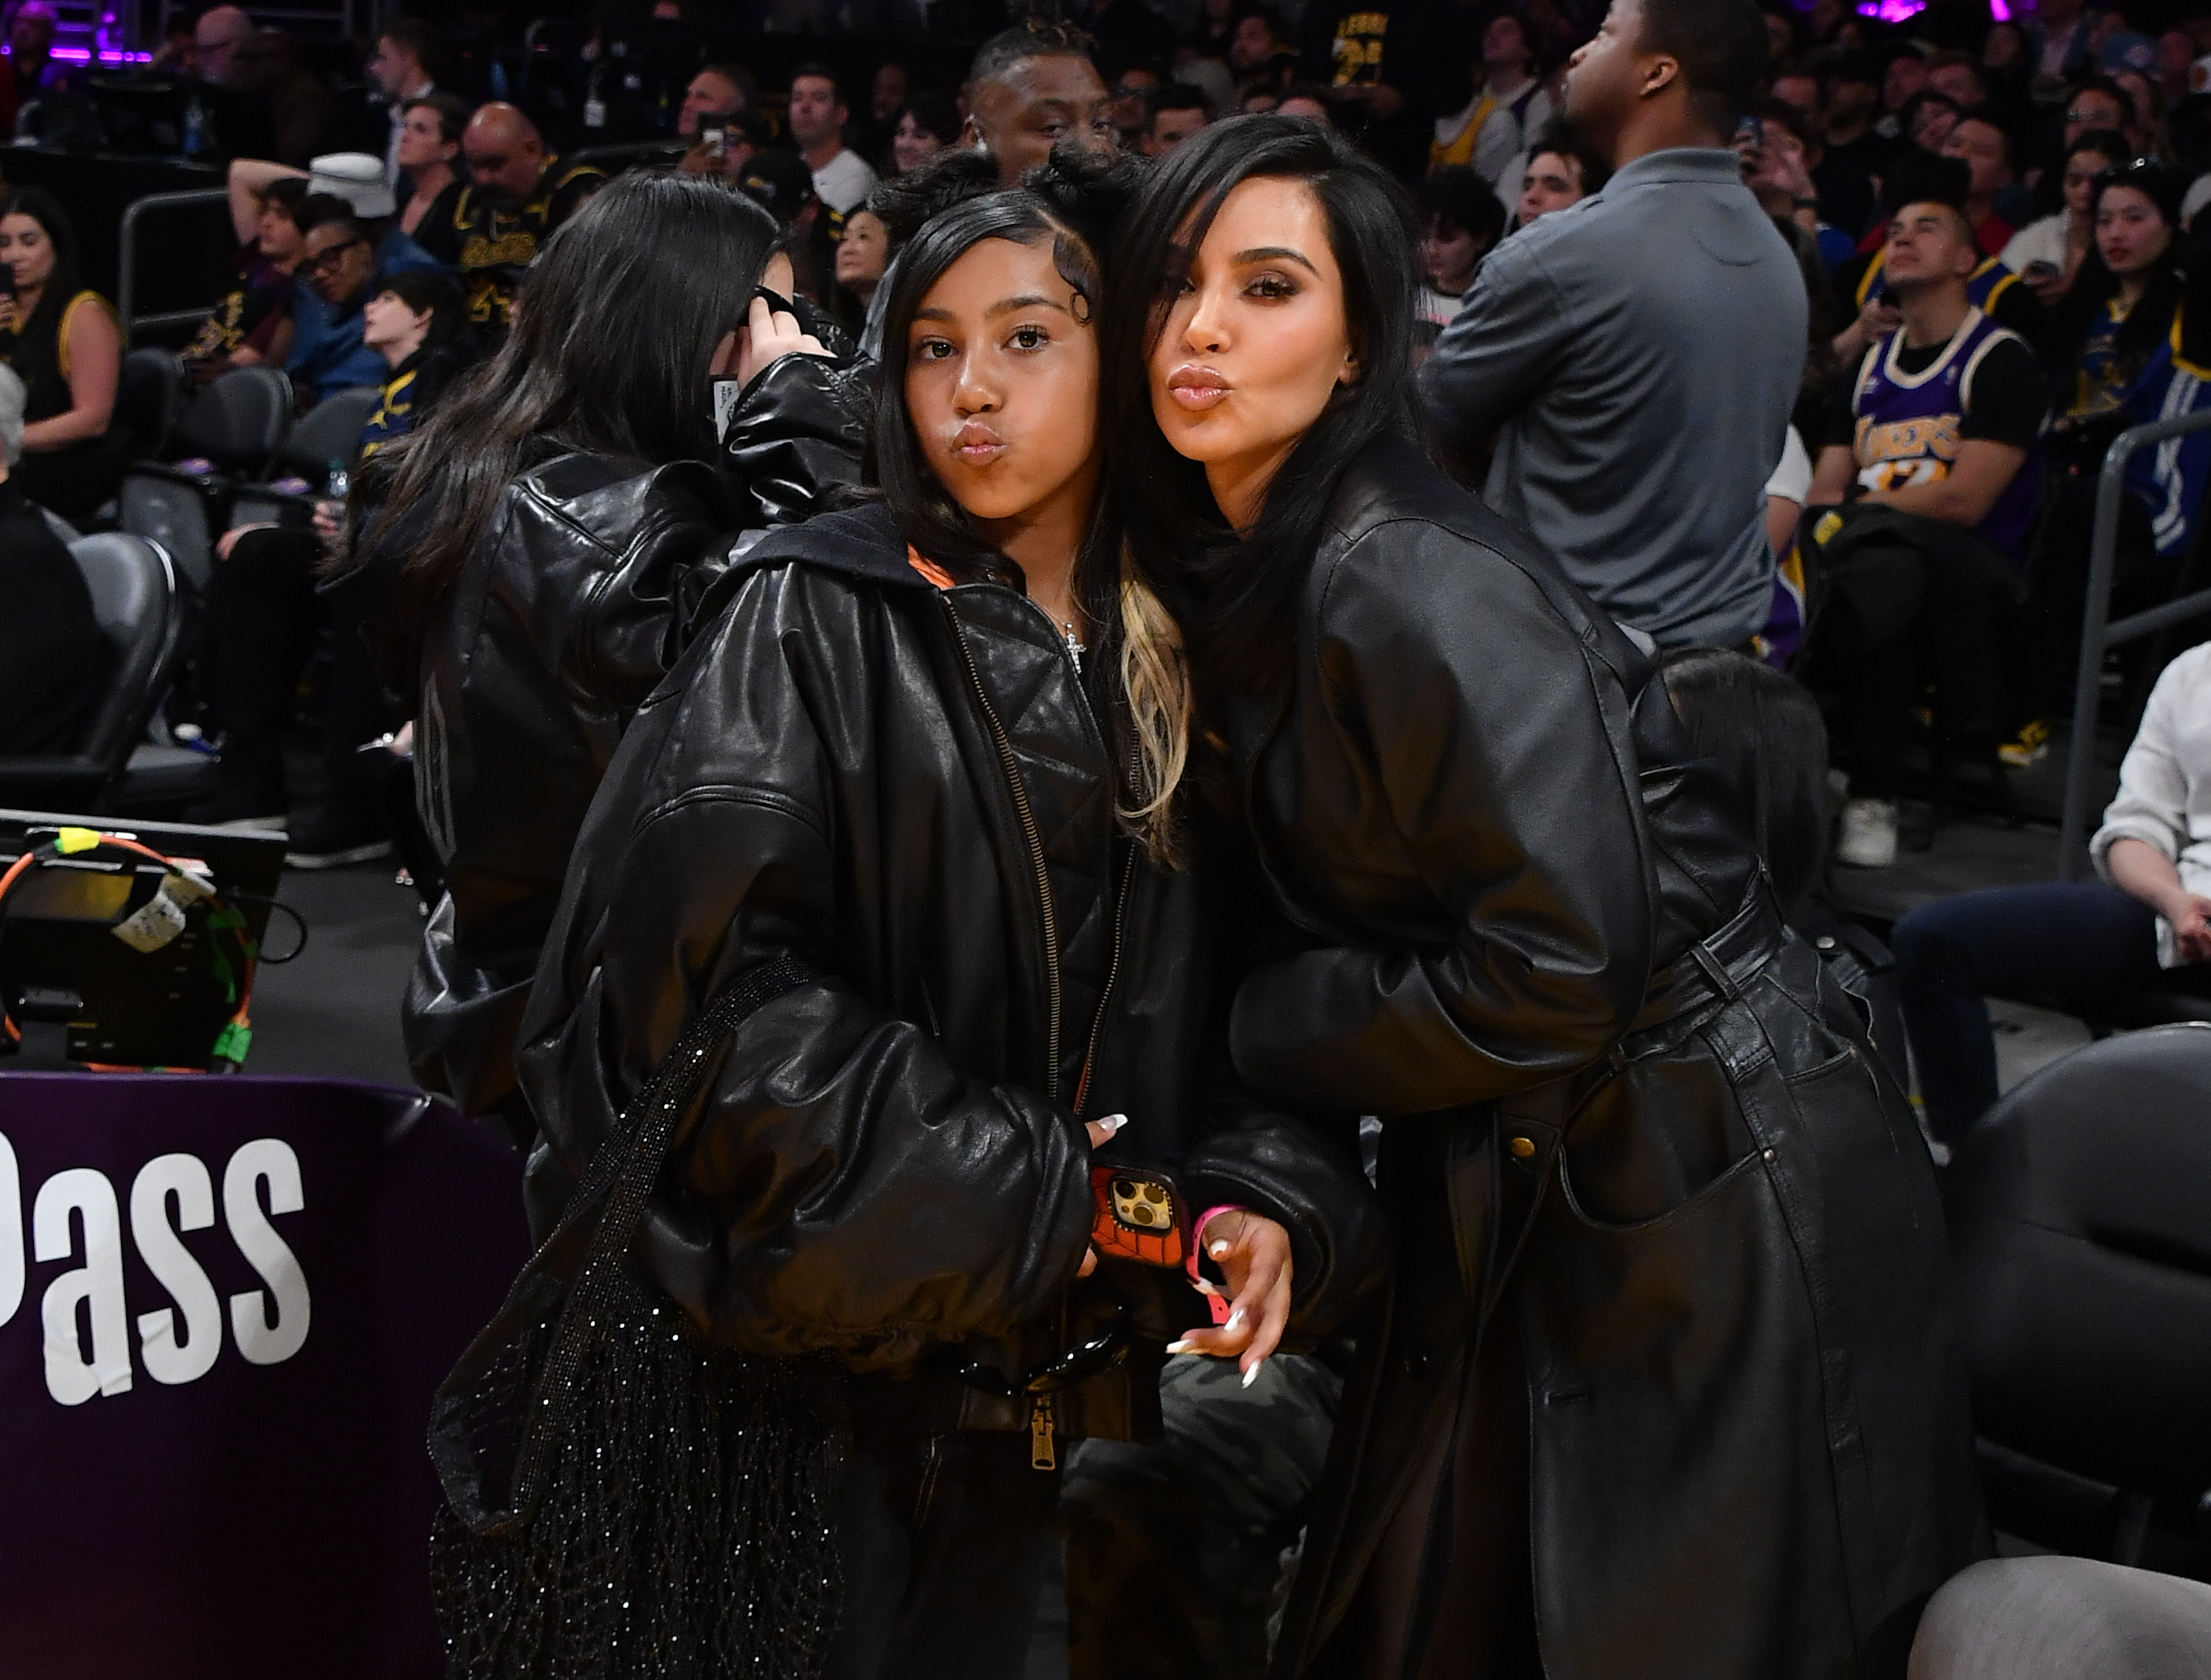 While in NYC, North was seen with Kim and a bunch of friends